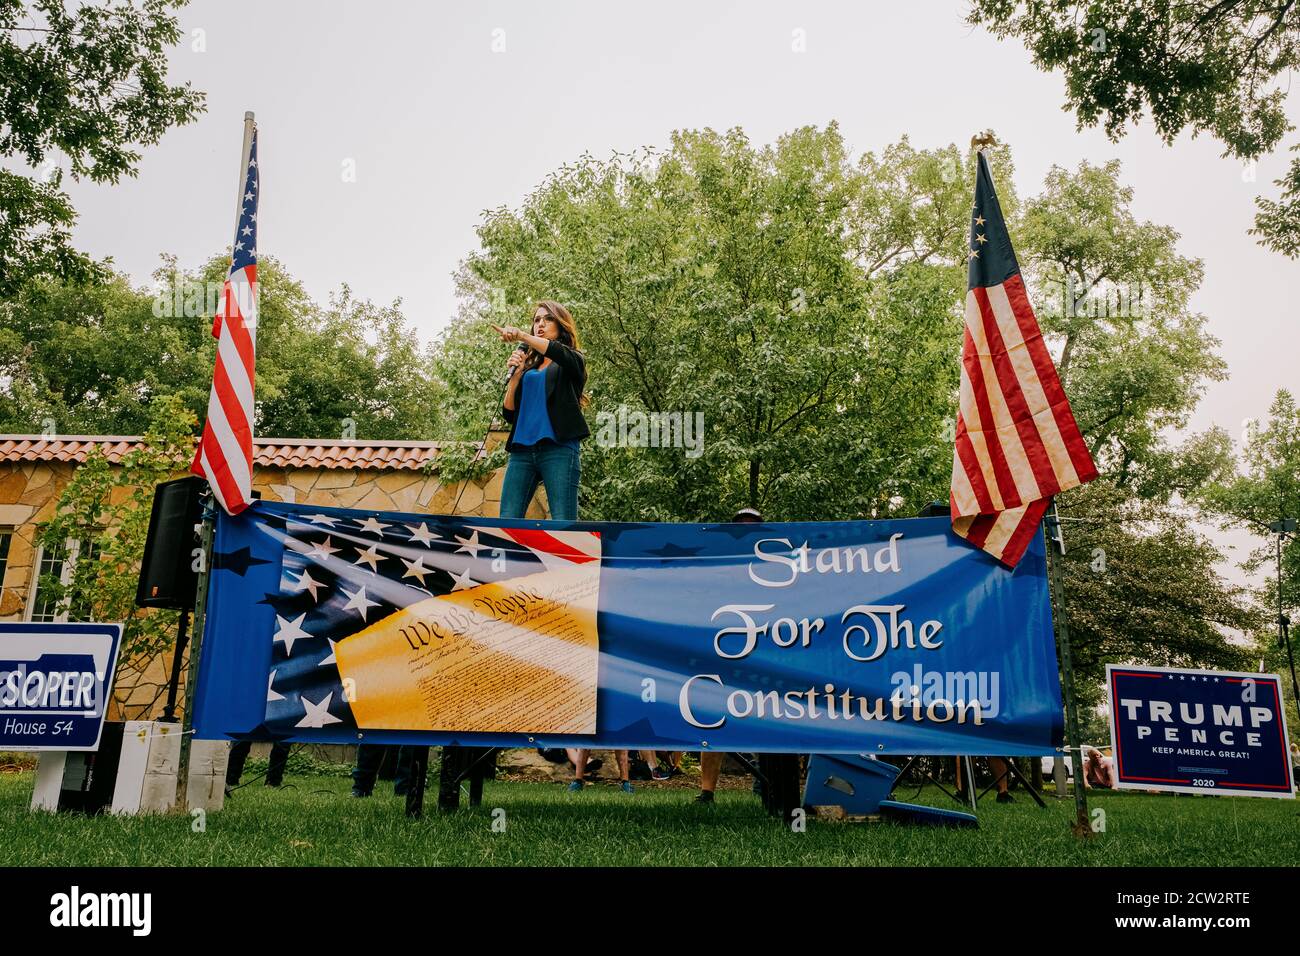 Lauren Boebert gives her stump speech at a political rally in Colorado for the 2020 election. Stock Photo